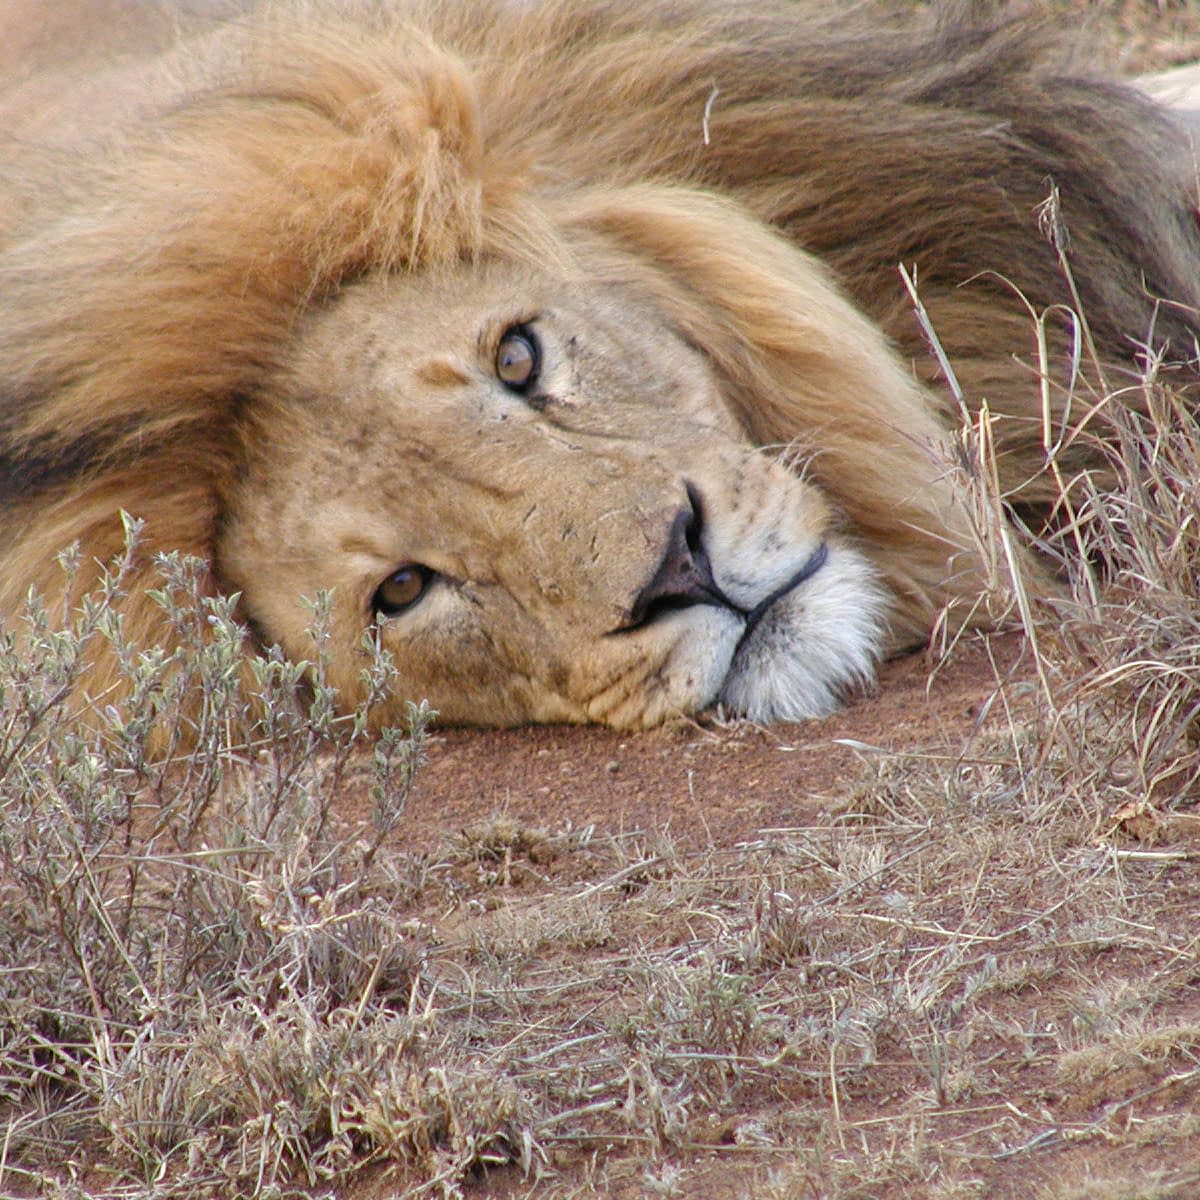 Male lion lying on the ground, looking at the camera